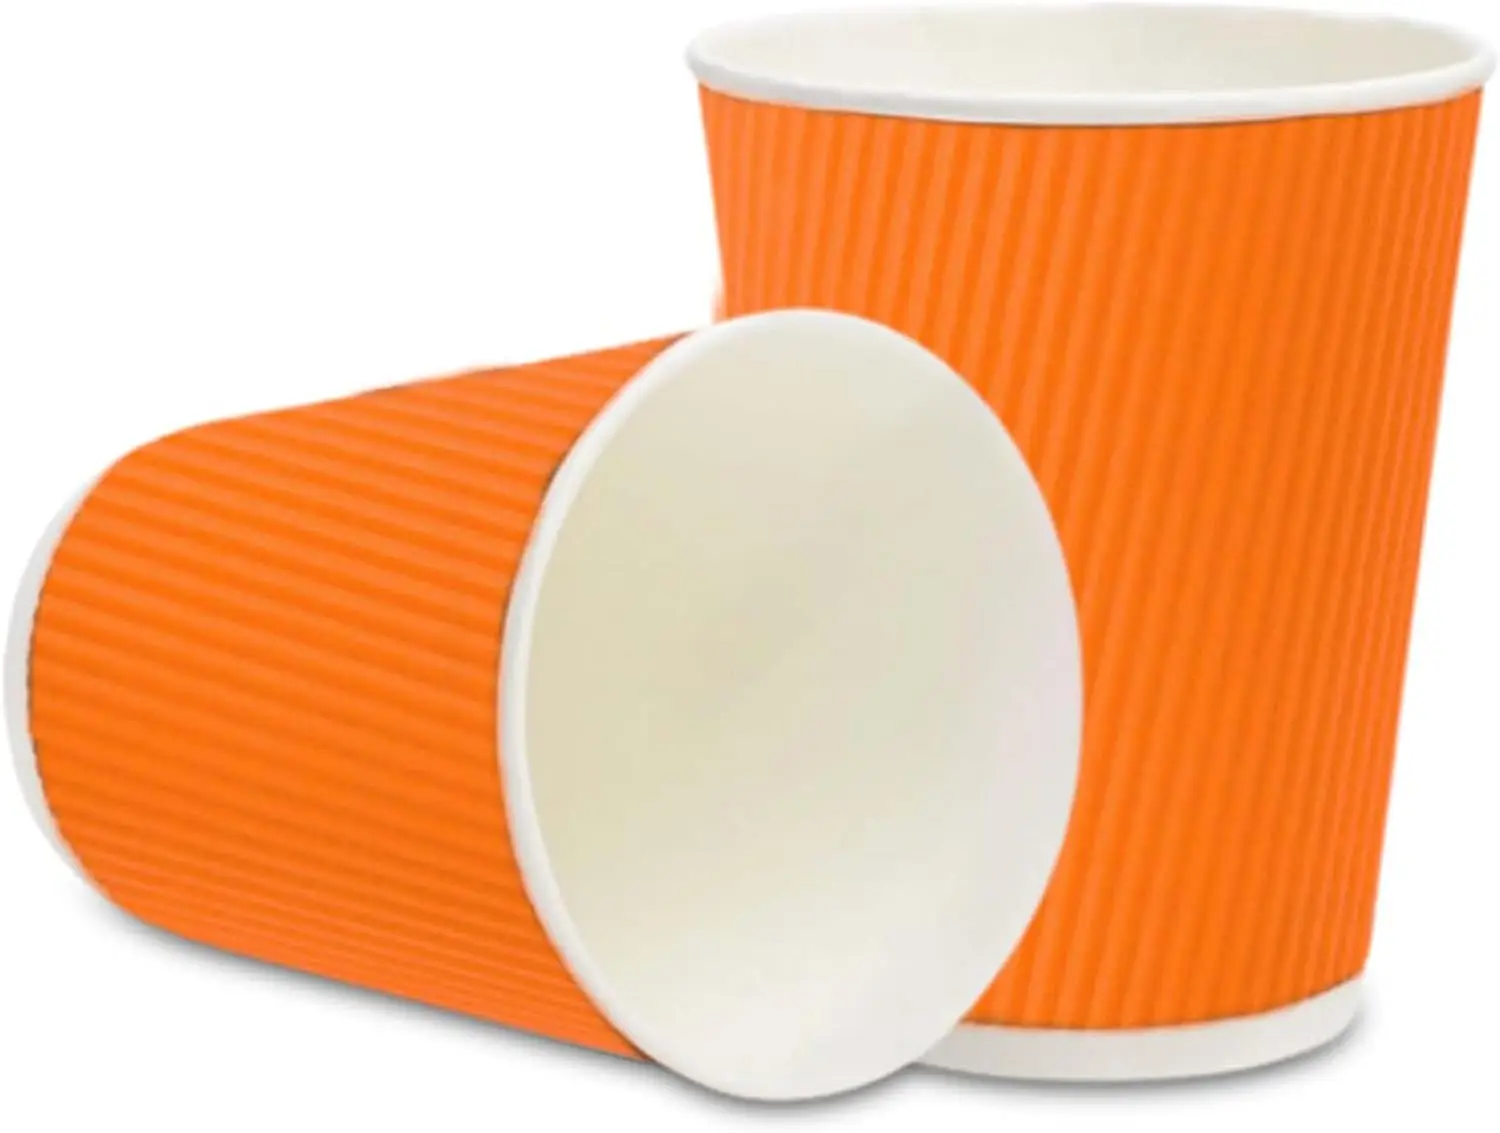 

Restaurantware 12 Ounce Disposable Coffee Cups 500 Double Wall Hot Cups For Coffee- Lids Sold Separately Rolled Rim Orange Paper